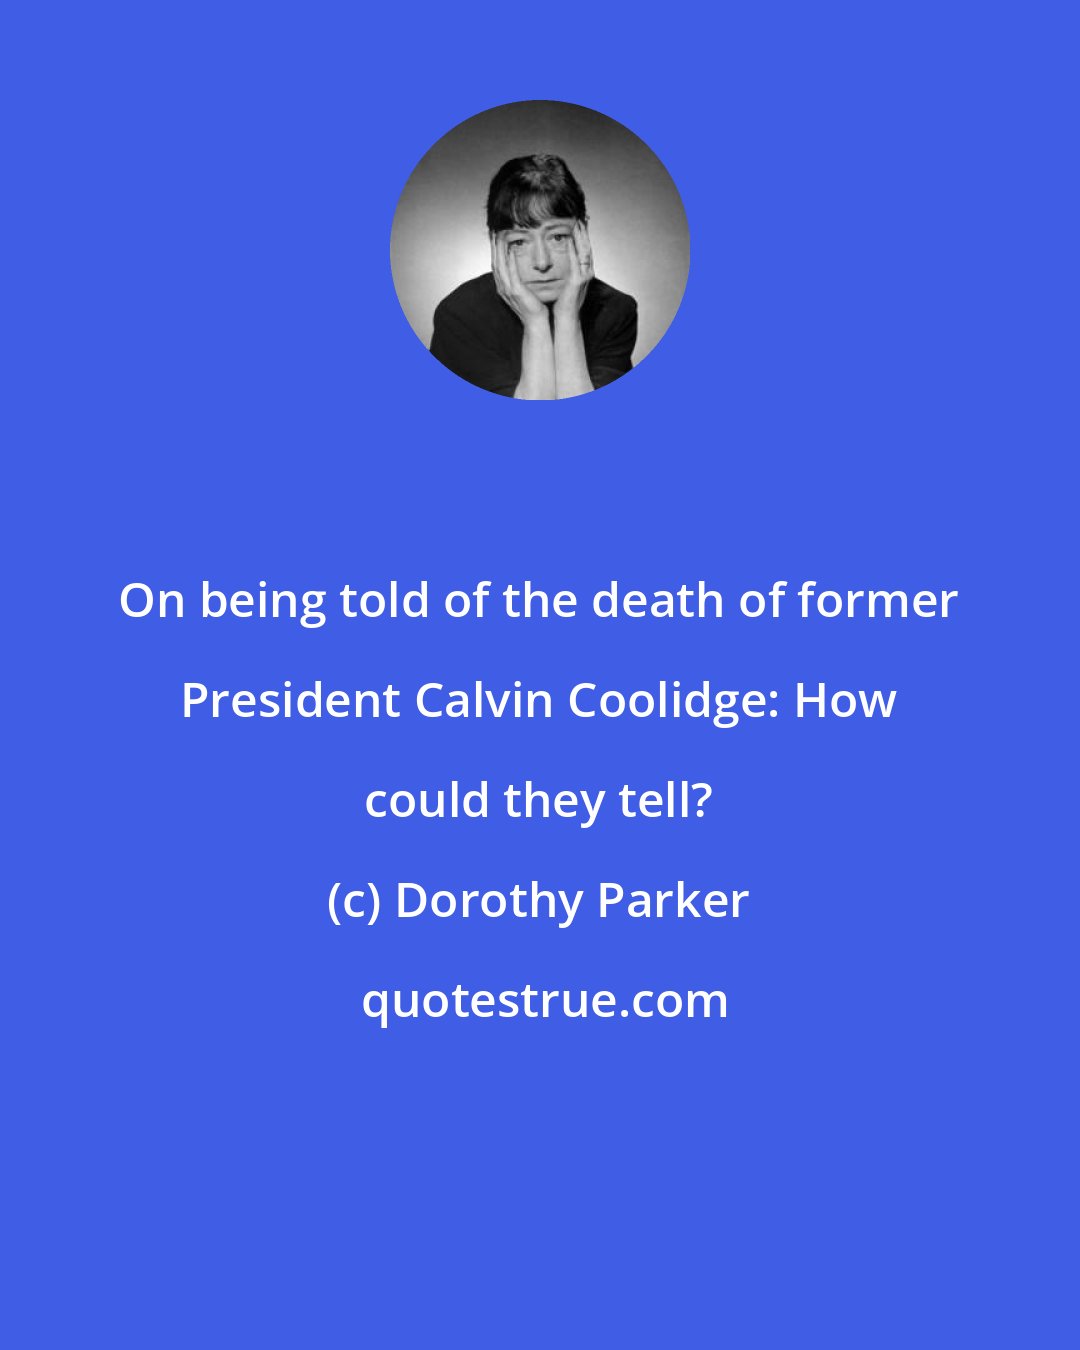 Dorothy Parker: On being told of the death of former President Calvin Coolidge: How could they tell?